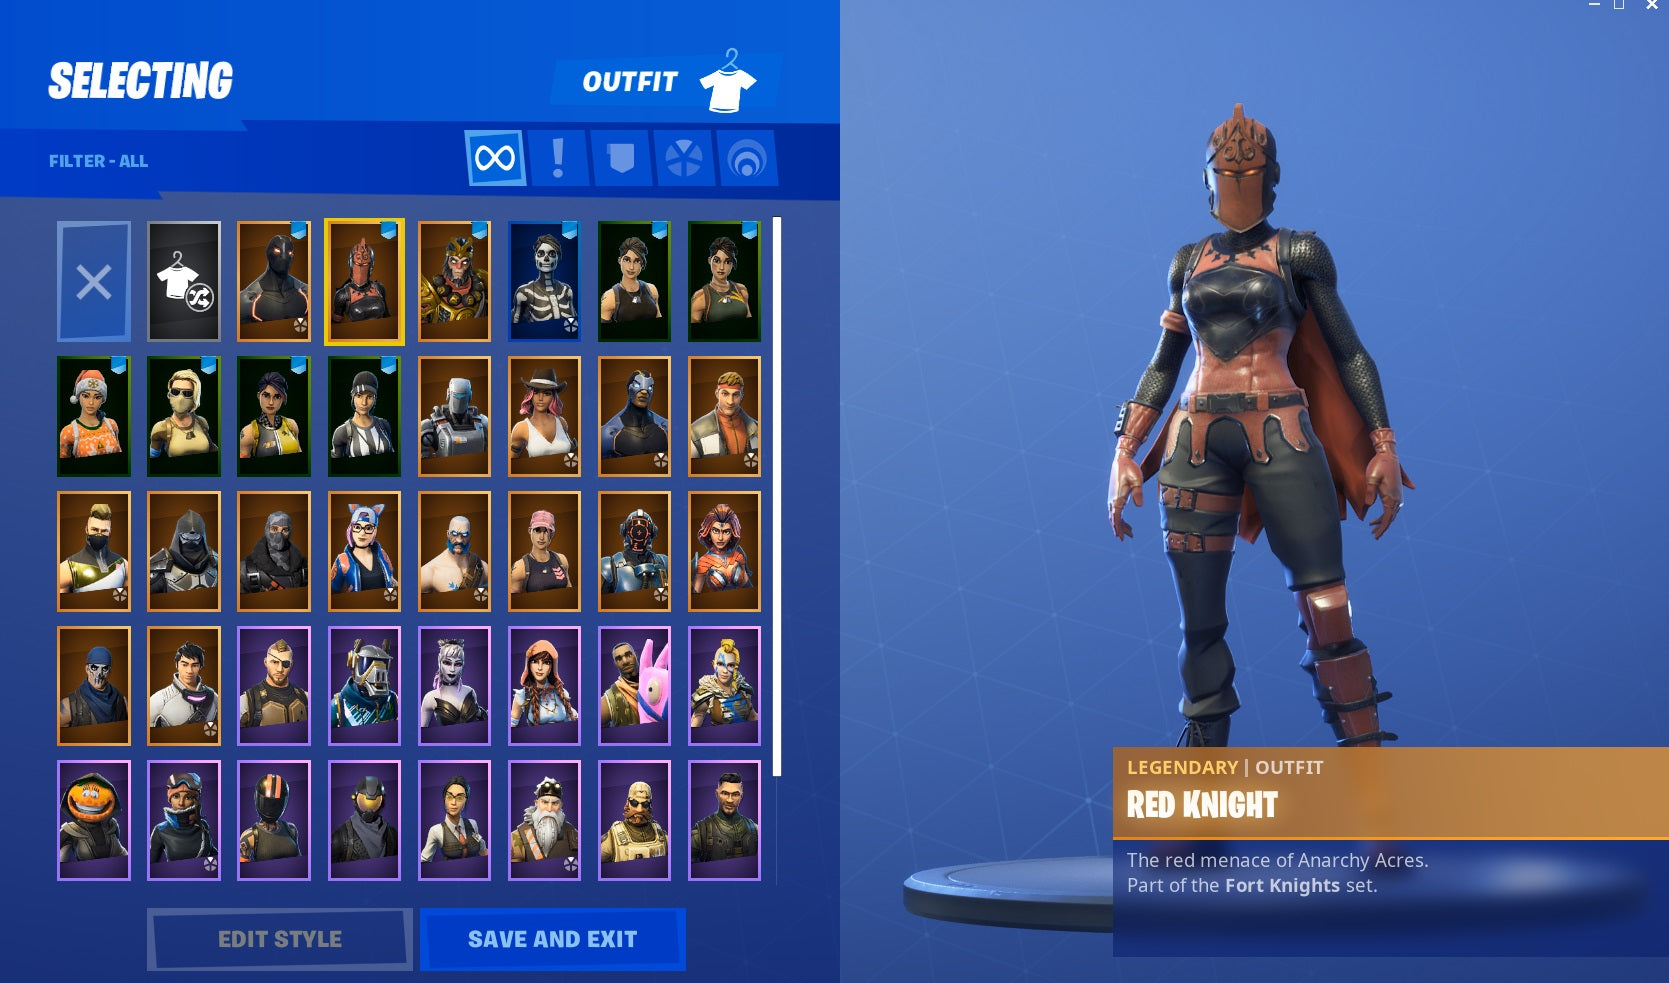 ⚡45 Outfits! 💎Wukong! 💎Omega! 💎Red Knight! 💎A.I.M.! ⚡35 Backs! ⚡StW! ⚡6x Pets! No.10